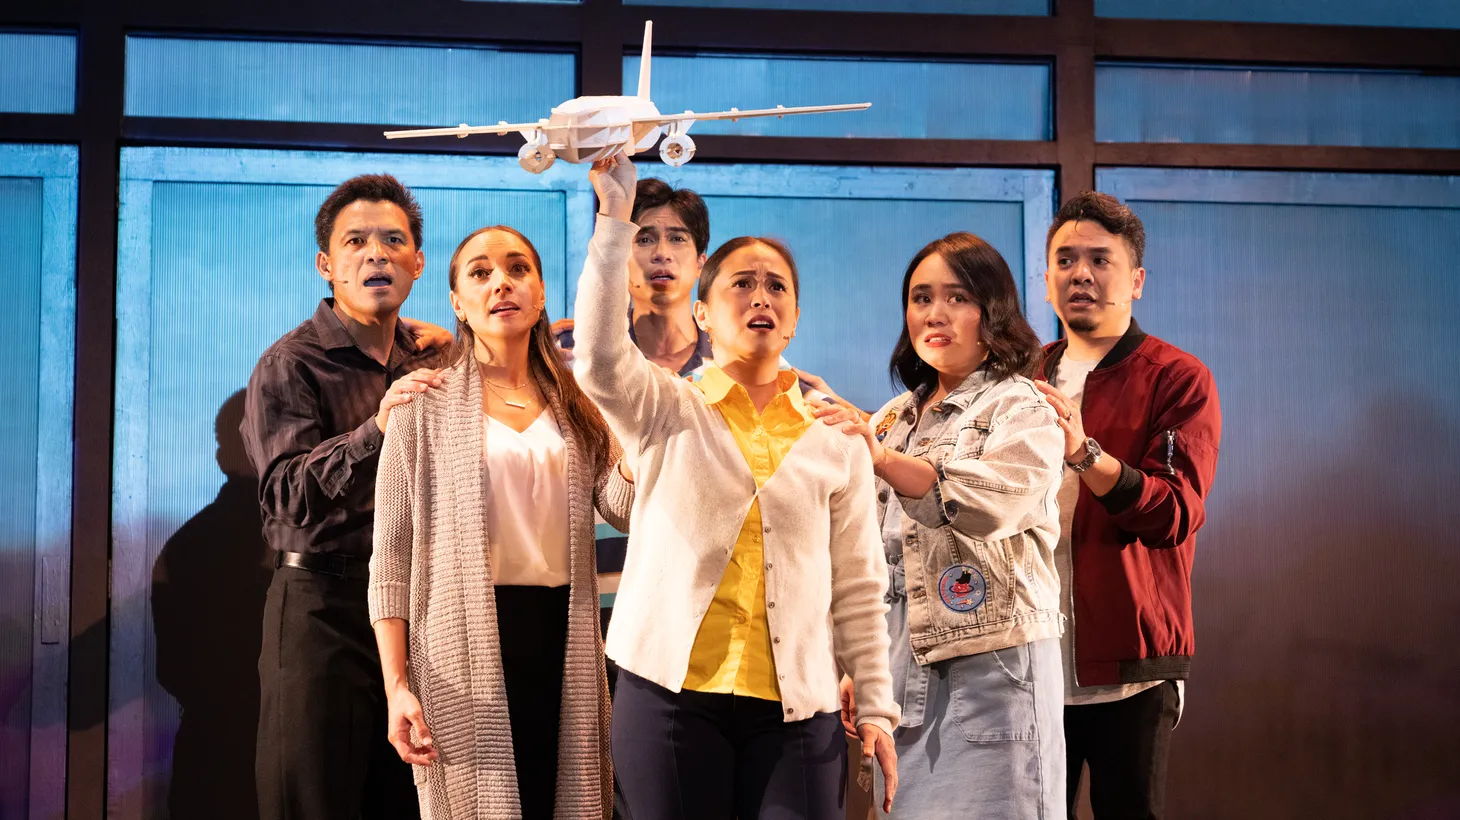 “We follow a woman named Jemalyn. She is a Filipina who has boarded a flight to the U.S. with a one-way ticket and a suitcase of stories,” explains Paulo Tiról of the show’s story.